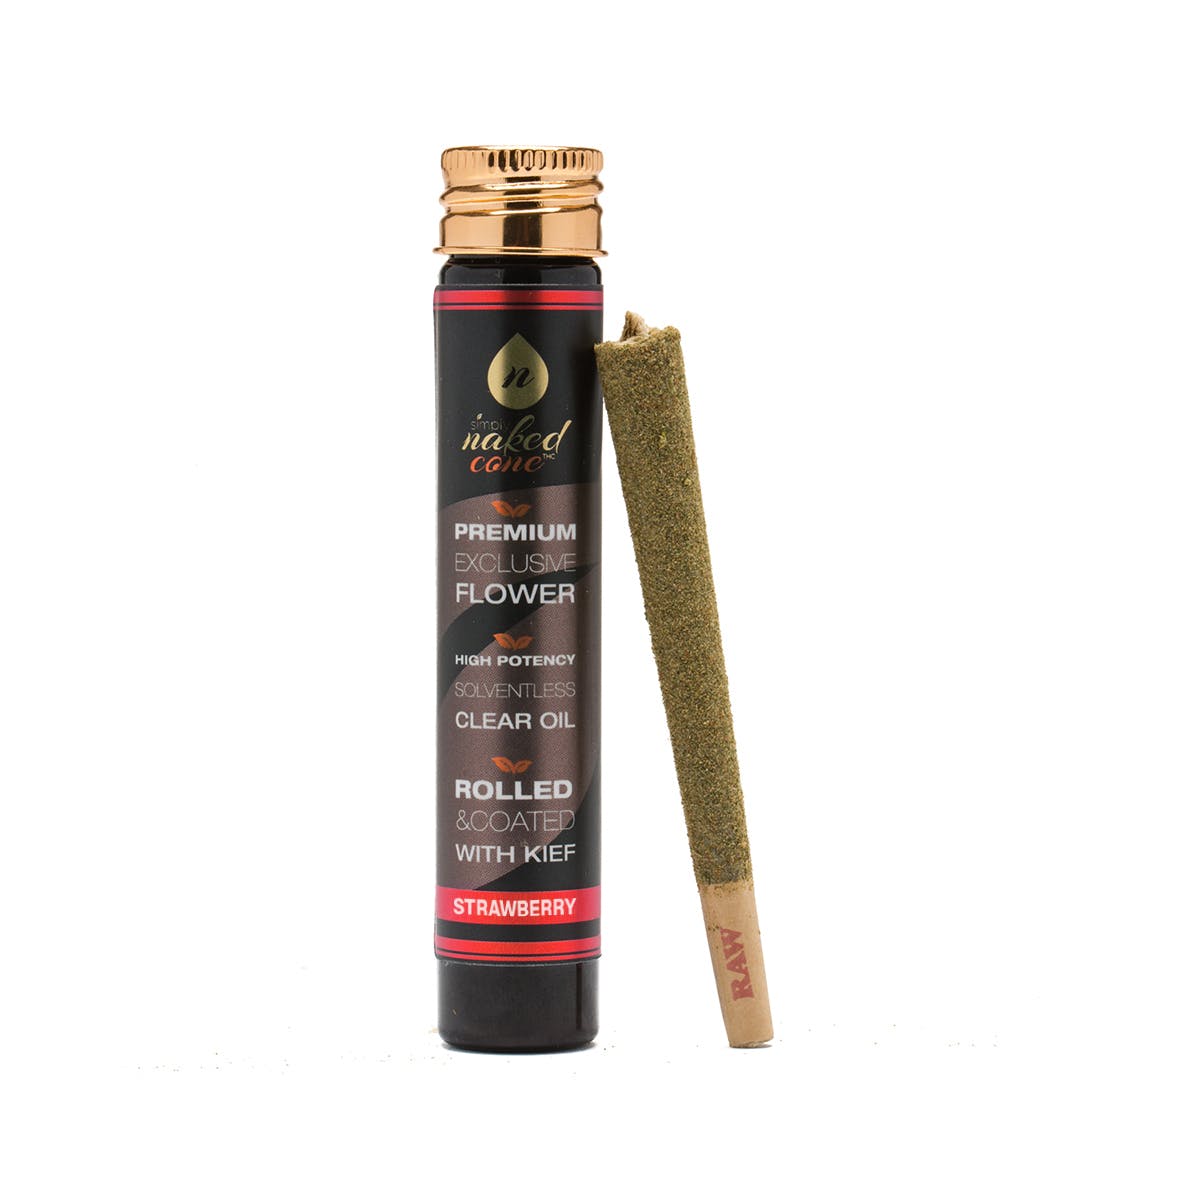 marijuana-dispensaries-og-florence-25-cap-in-los-angeles-strawberry-simply-naked-cone